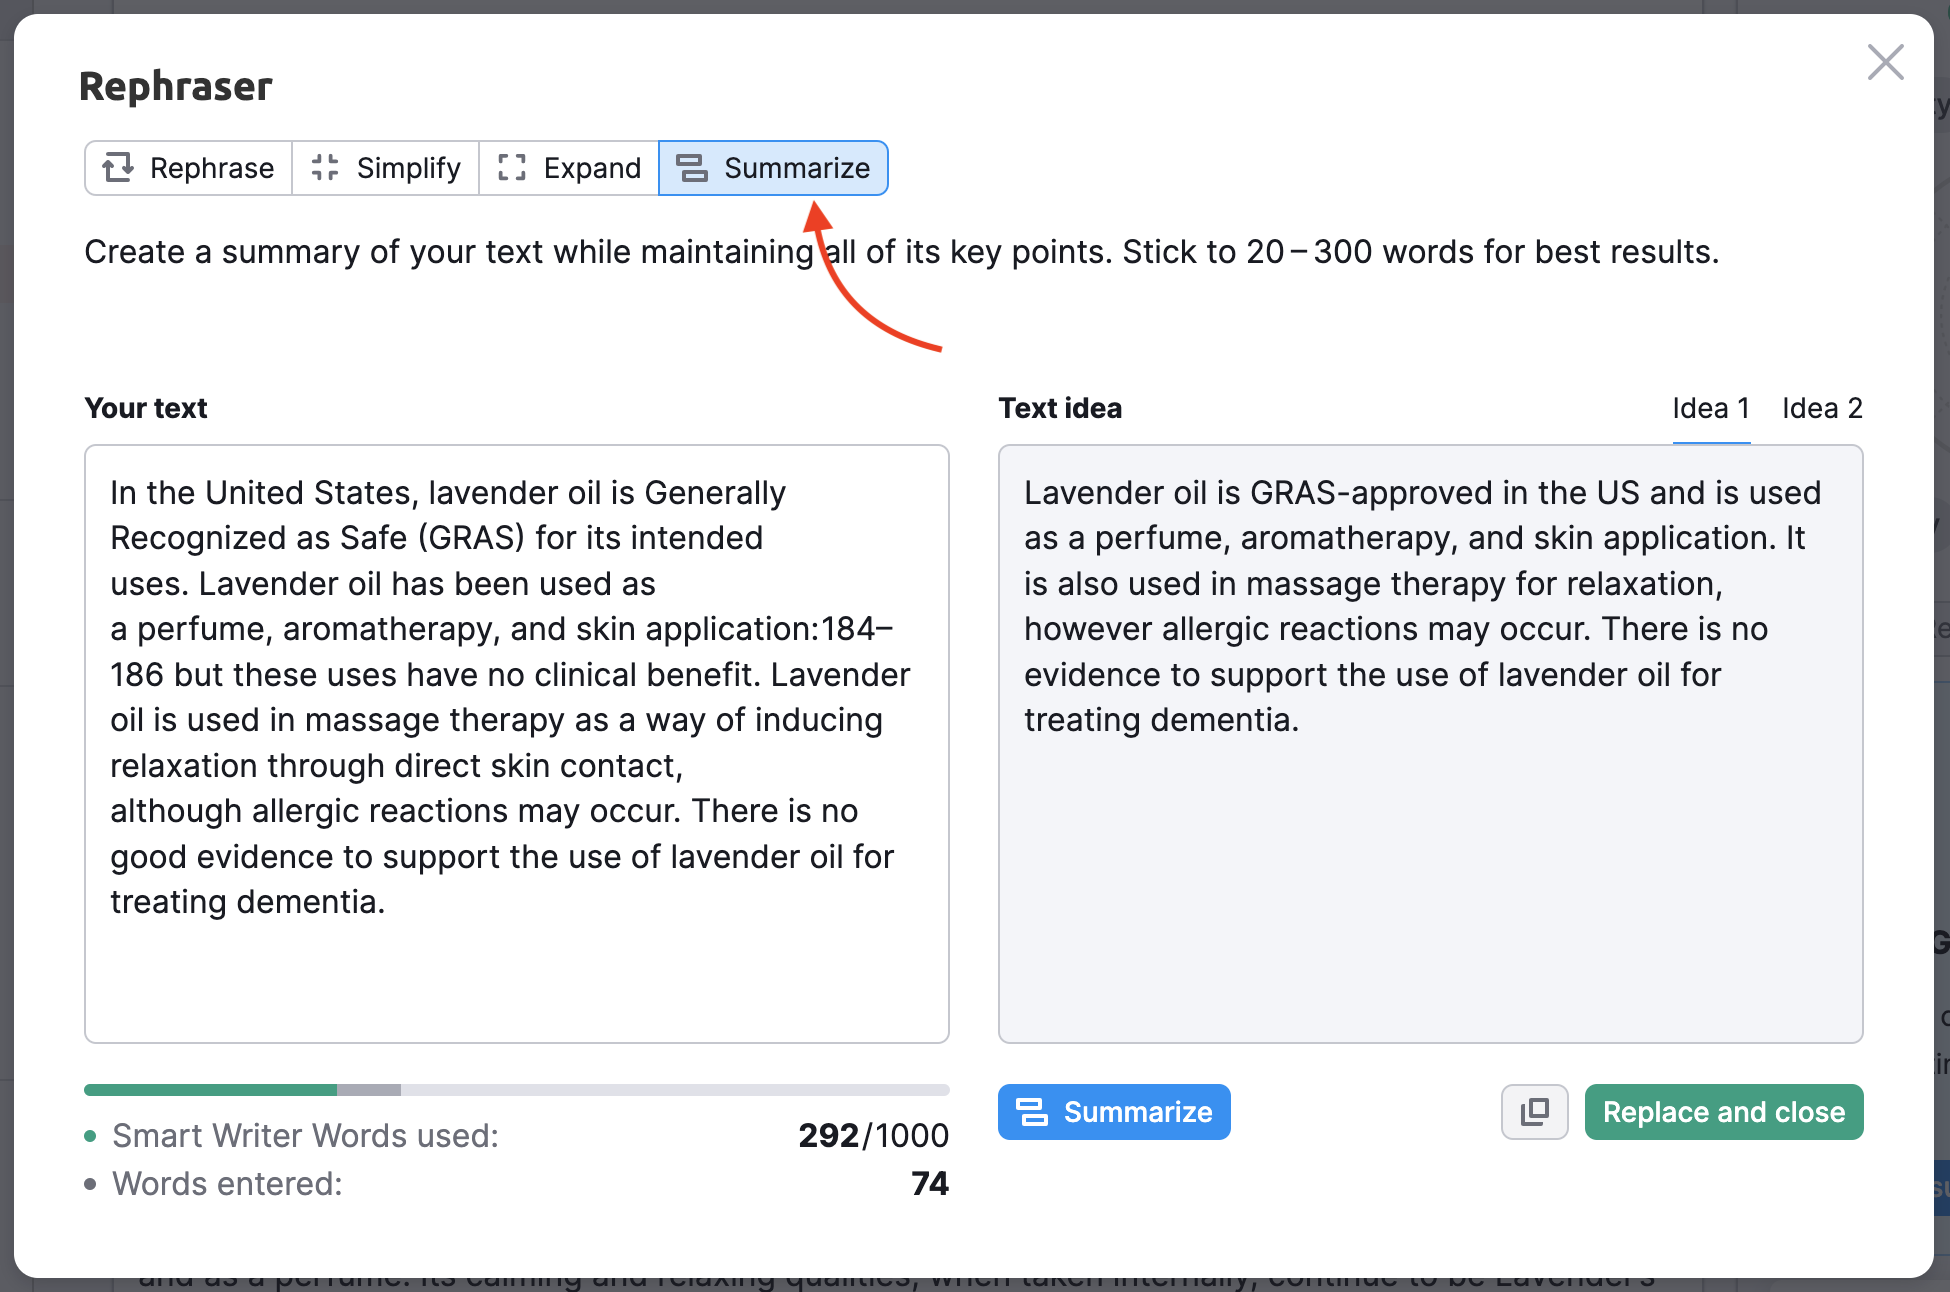 Example showing how to the Rephraser feature works. An arrow points to the "Summarize" option in the menu. The example shows two boxes of text: one with your text and the other with the summarized text idea. 